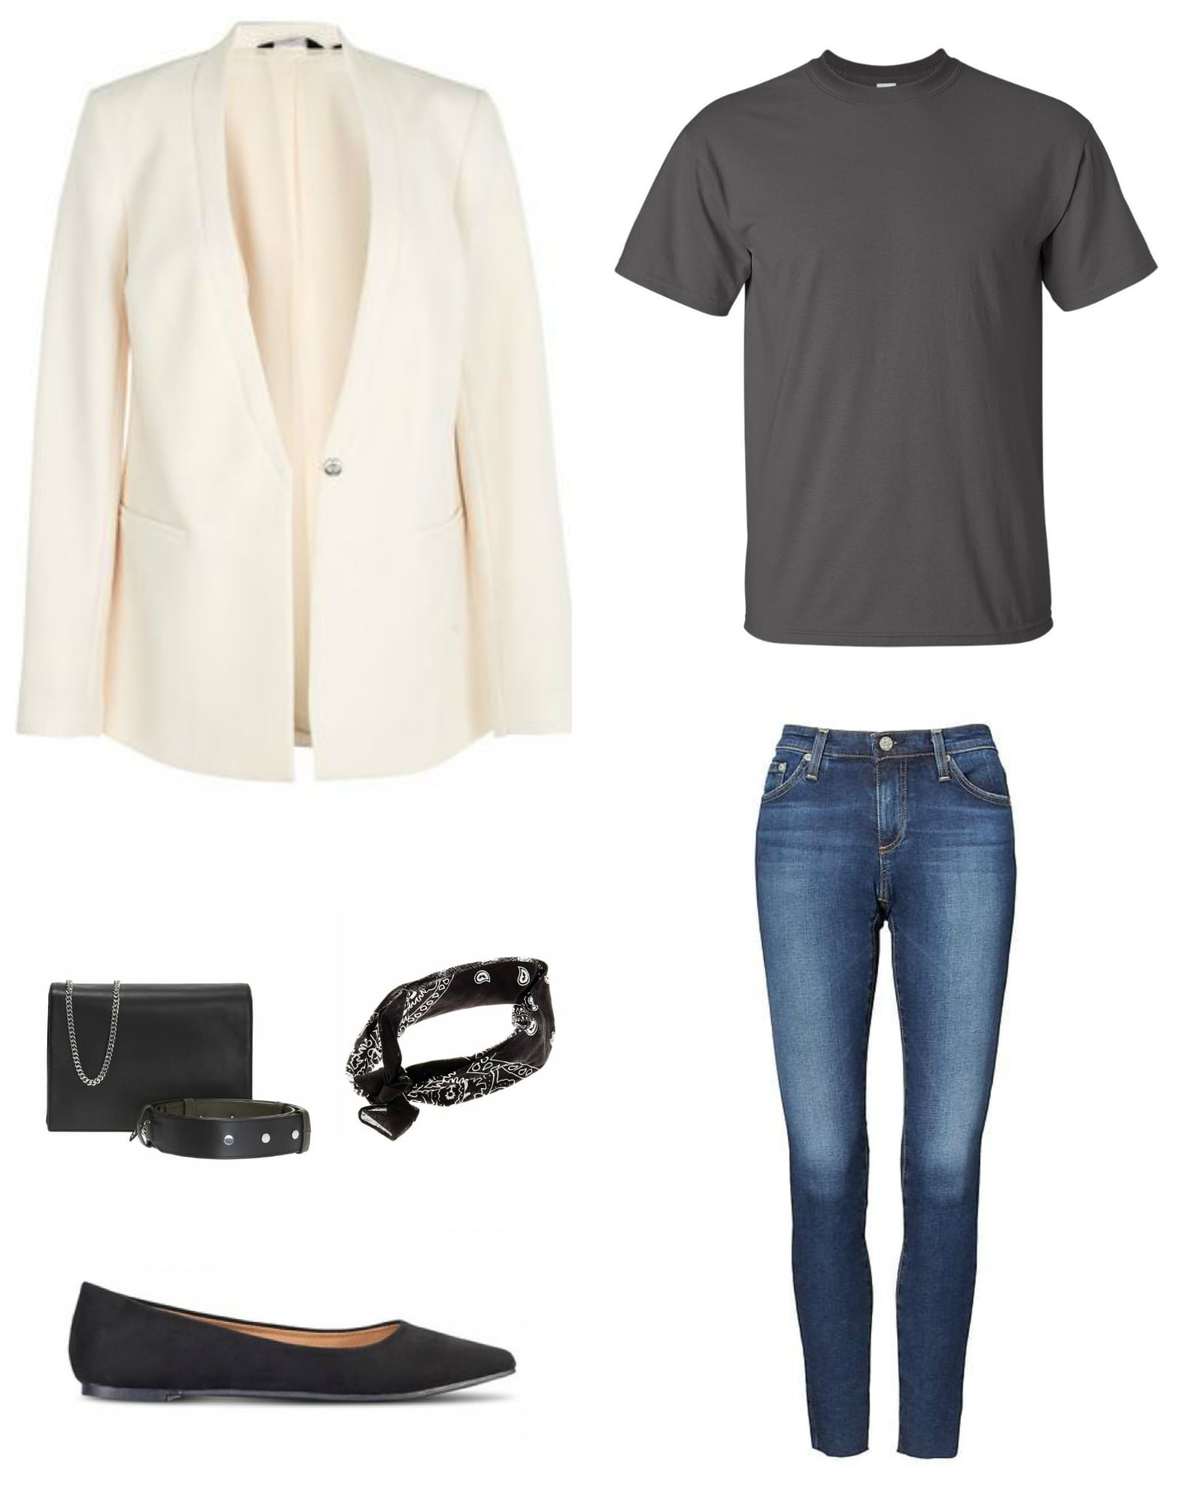 Image is of a cream blazer styled with a gray t-shirt, ankle jeans, a black handbag, black bandana tied at the neck, and black Rothy's Flats in the point style.